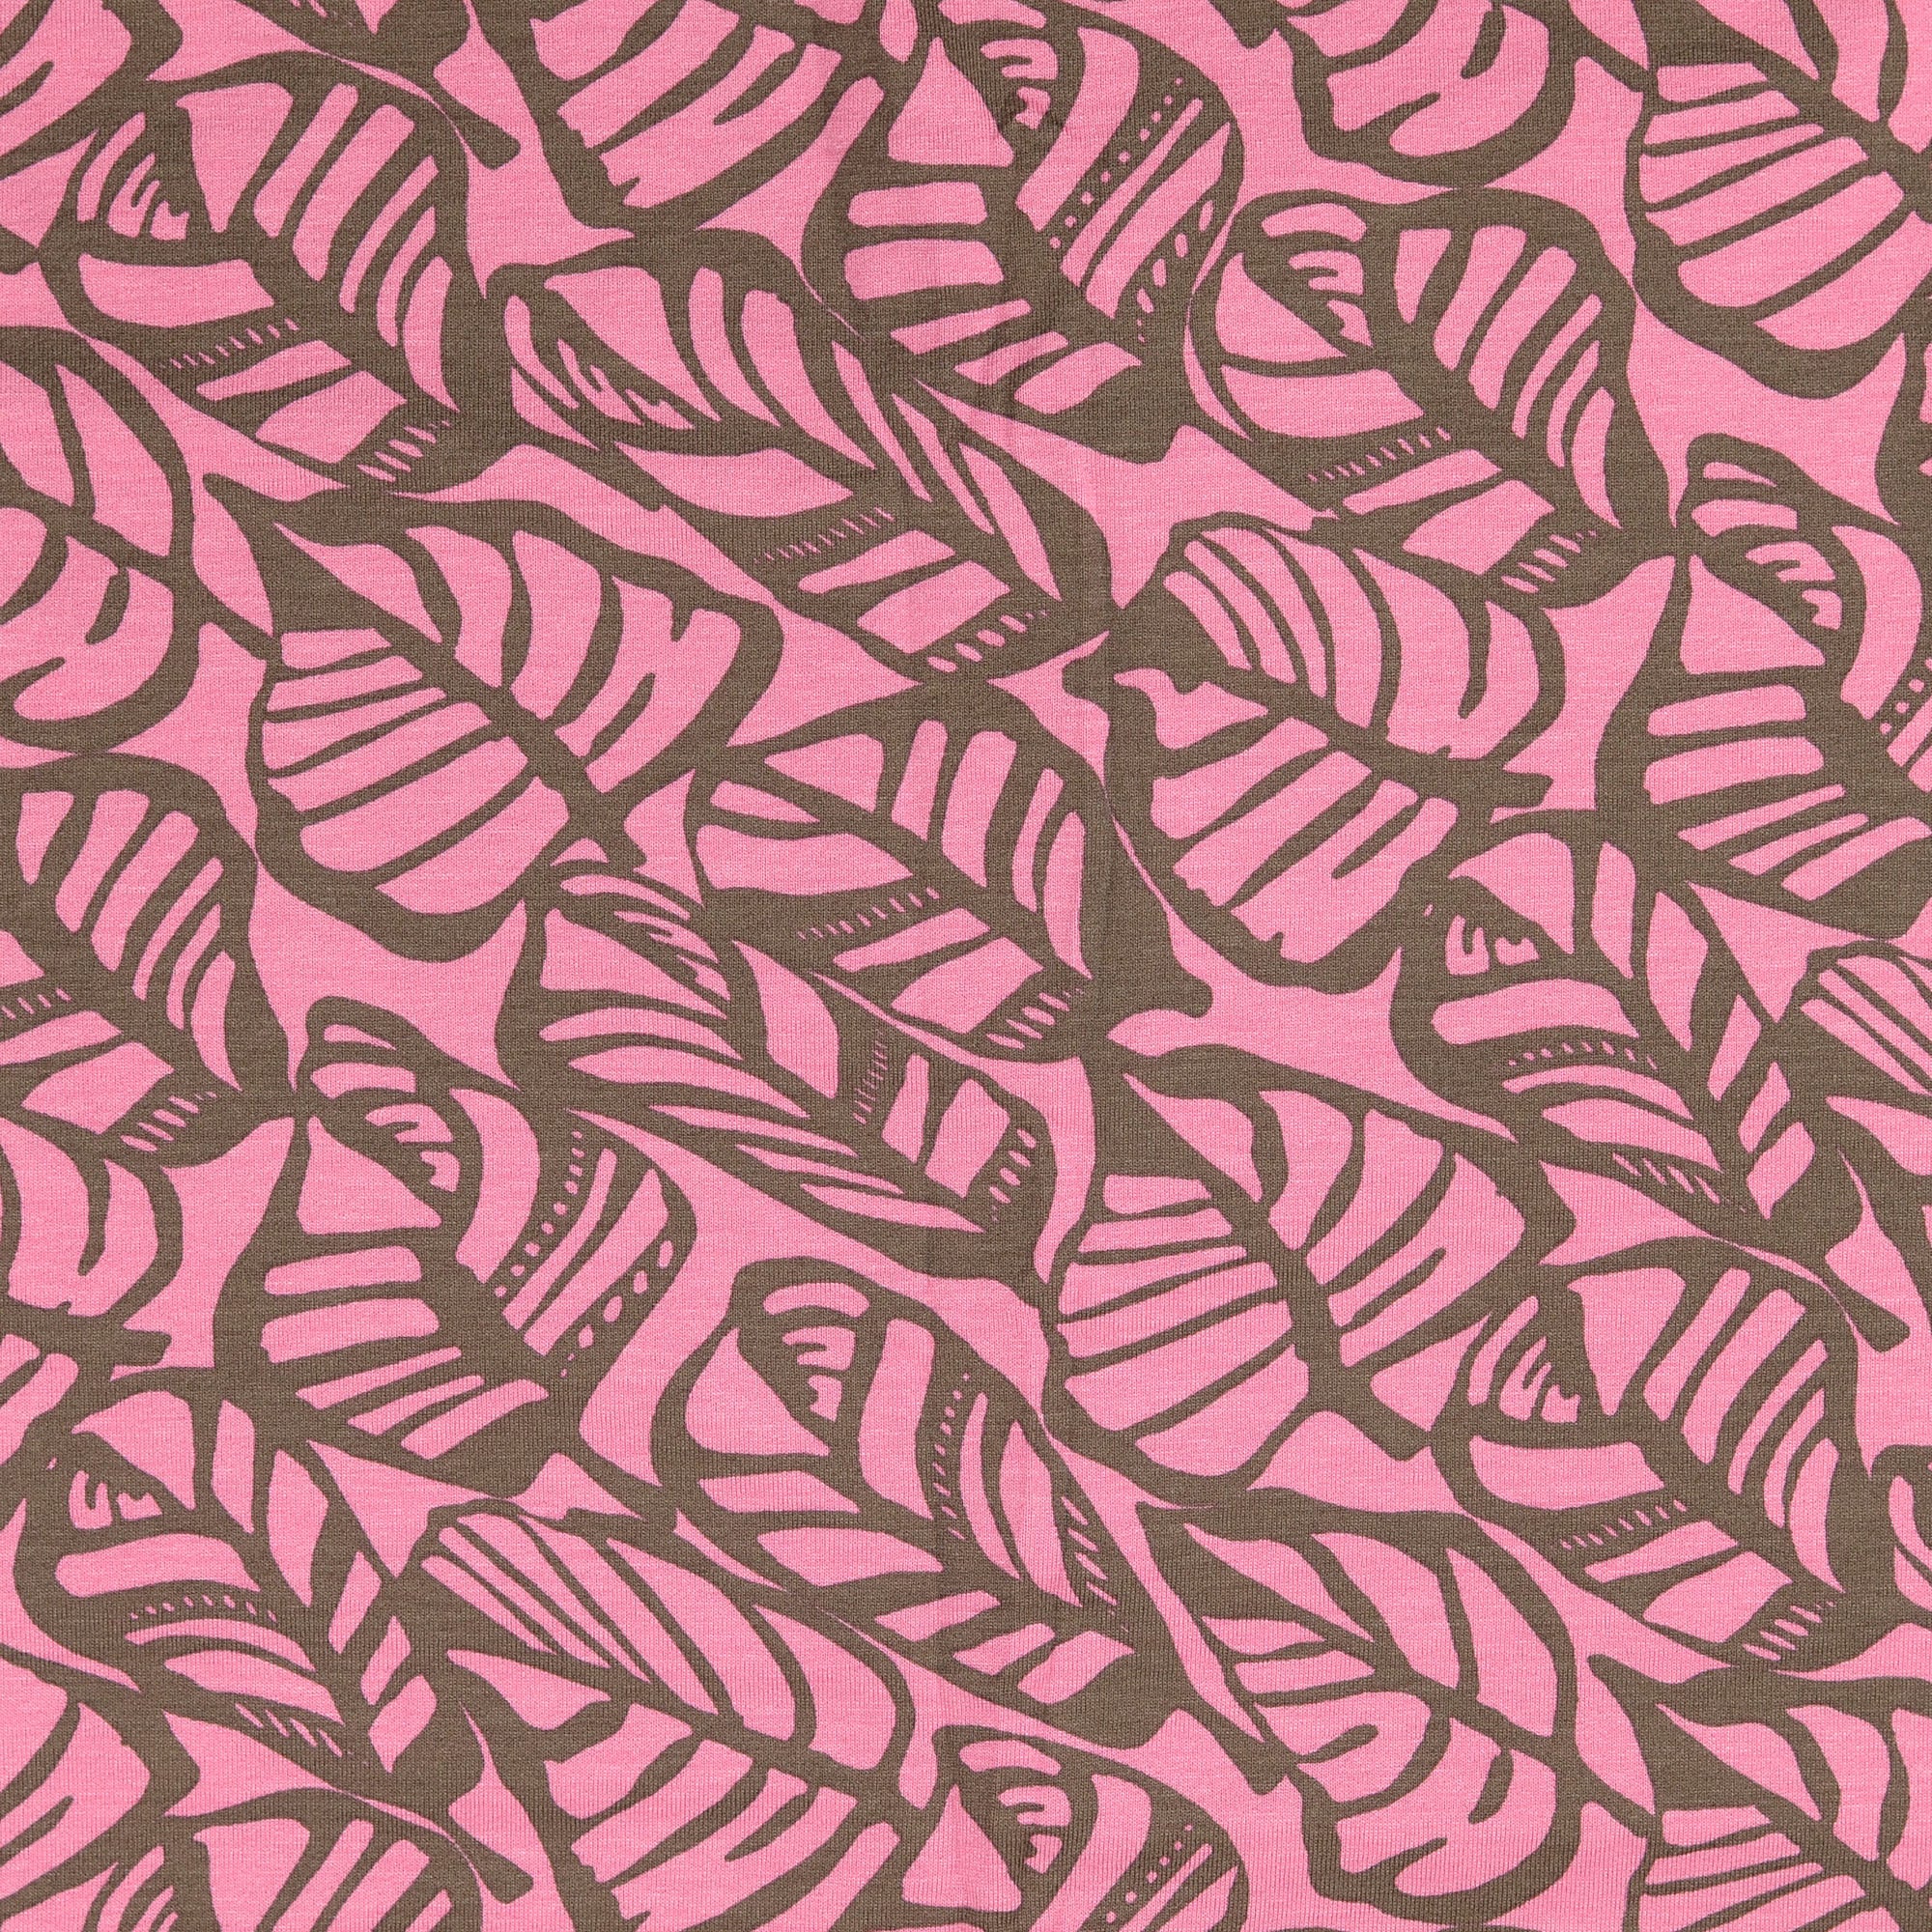 REMNANT 2.73 Metres - Graphic Leaves Pink Viscose Jersey Fabric